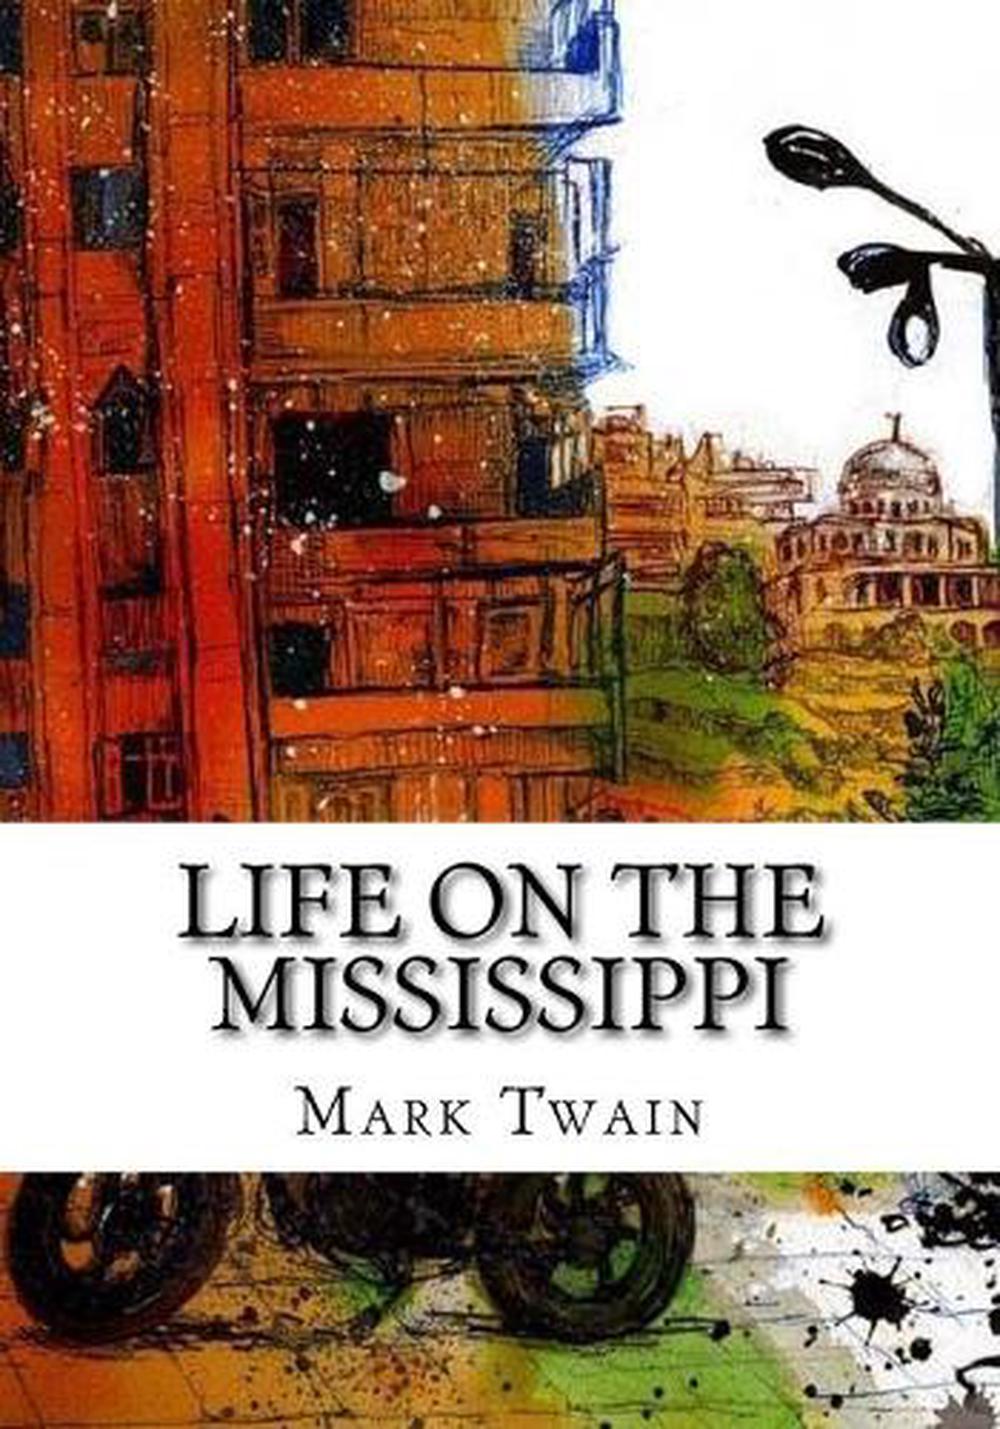 mark twain book life on the mississippi